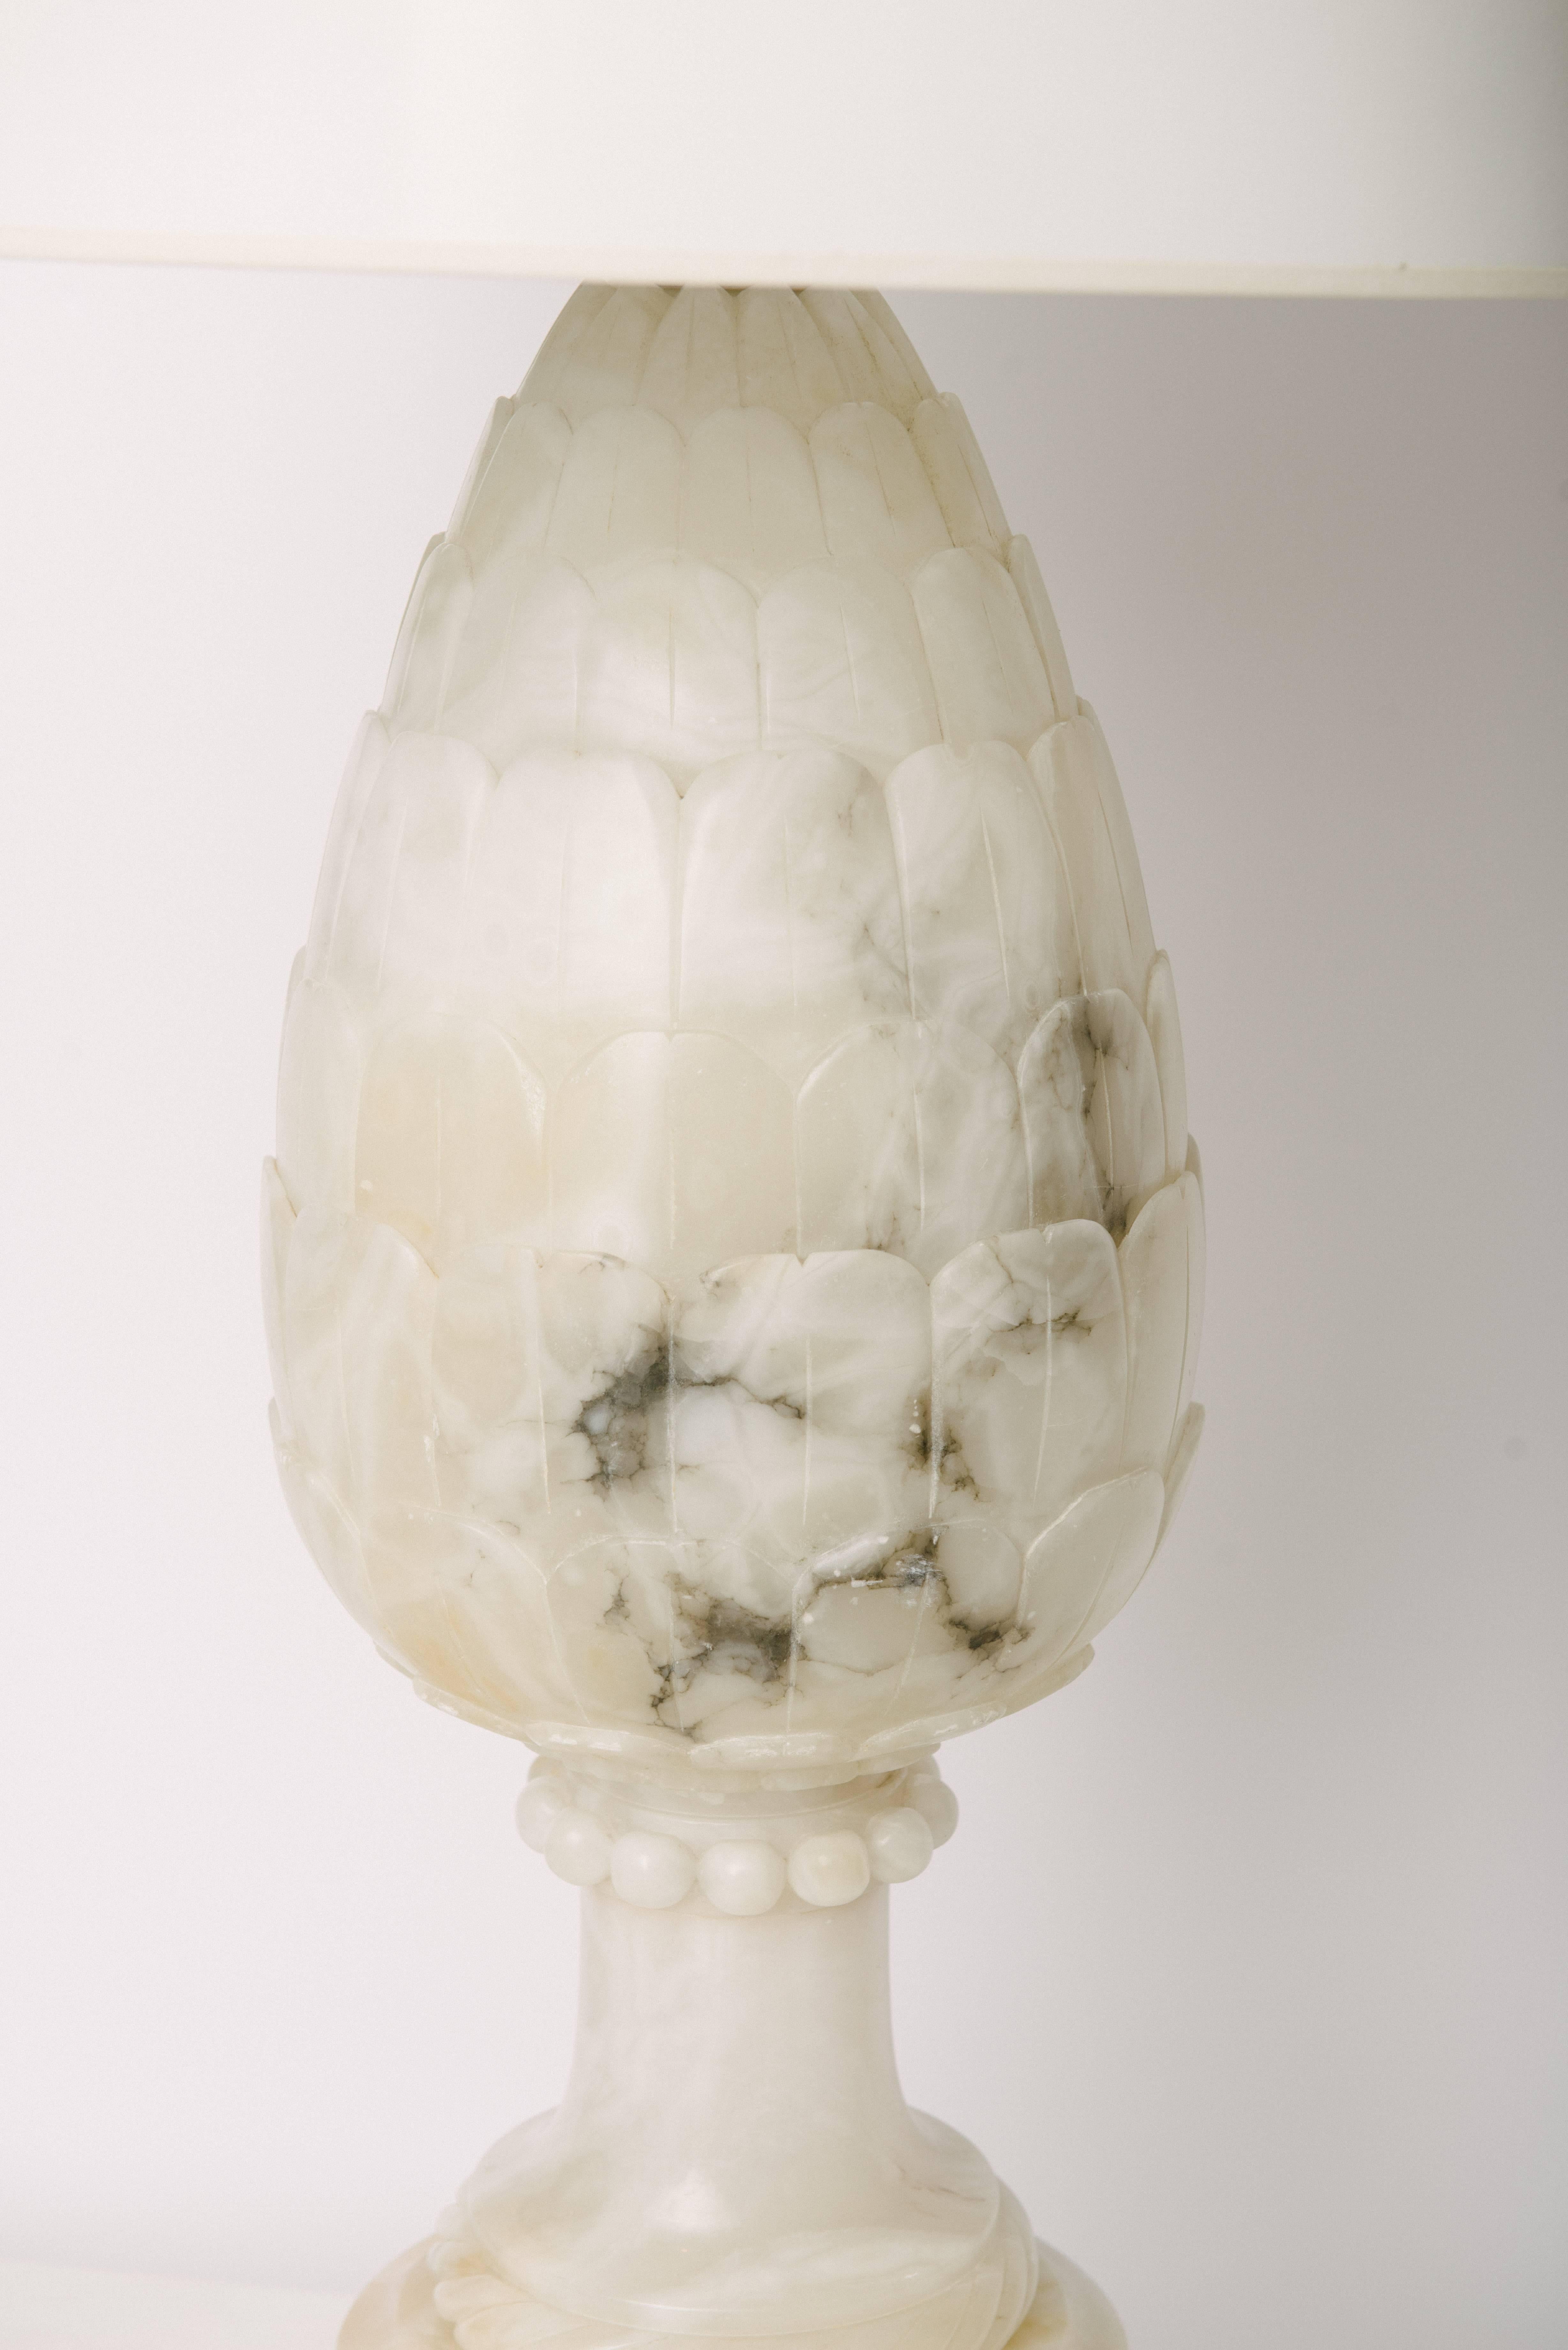 A monumental hand-carved vintage pineapple alabaster lamp by Marbro. This beautiful lamp is a creamy white with gray veining. The gilt lamp base is 11